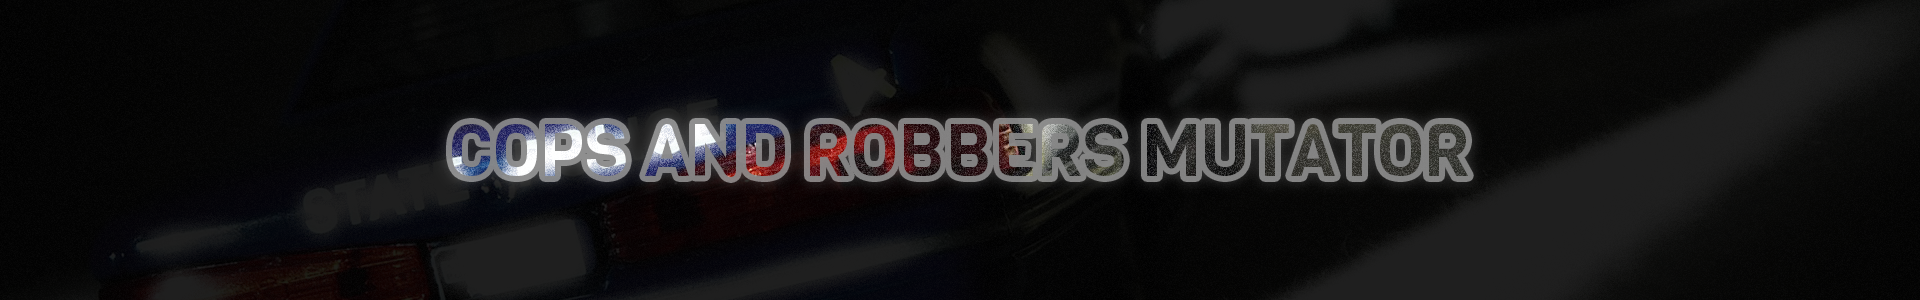 cops and robbers banner